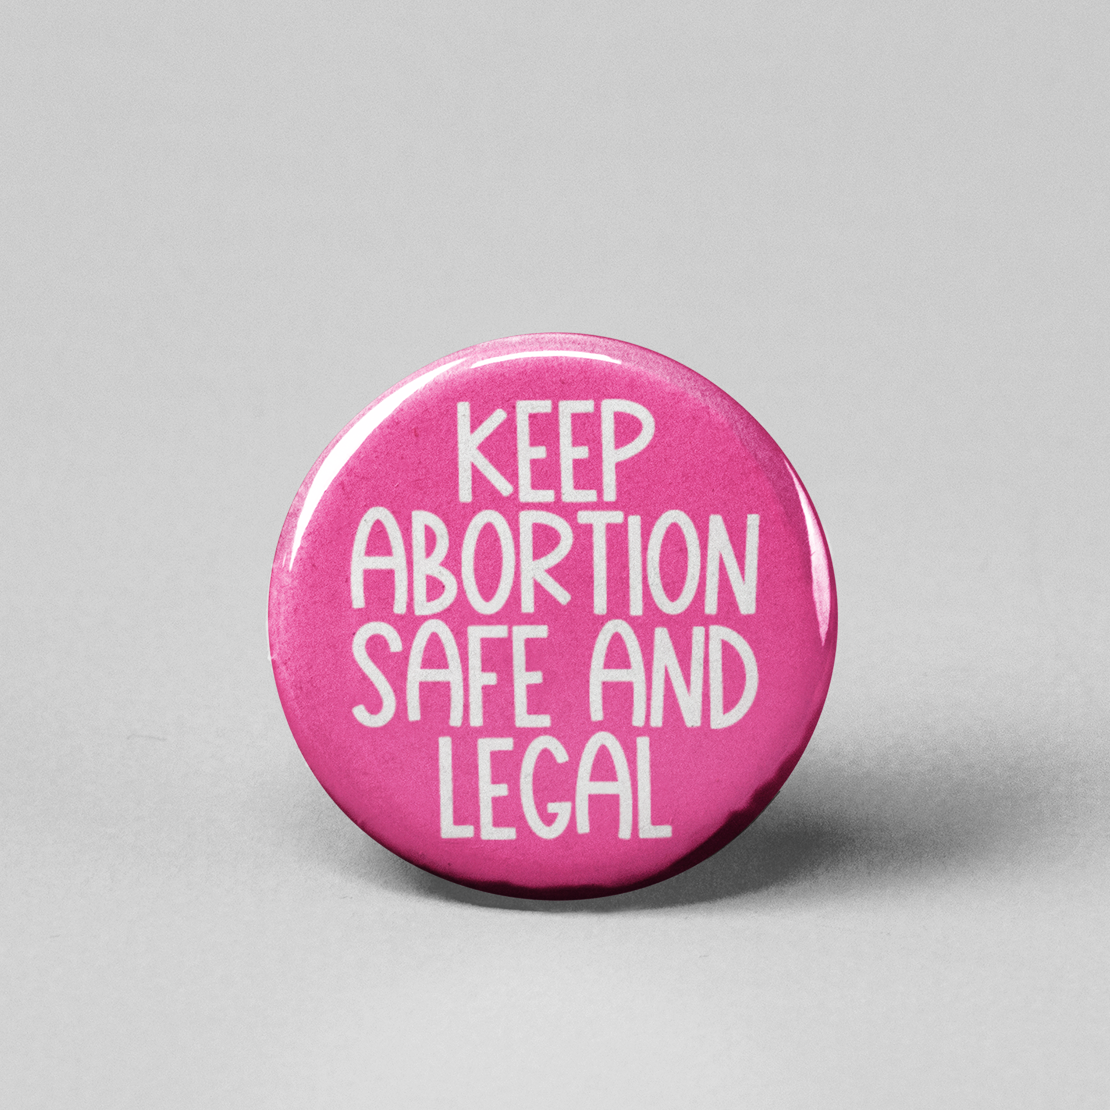 The Pin Pal Club - Keep Abortion Safe and Legal Pinback Button